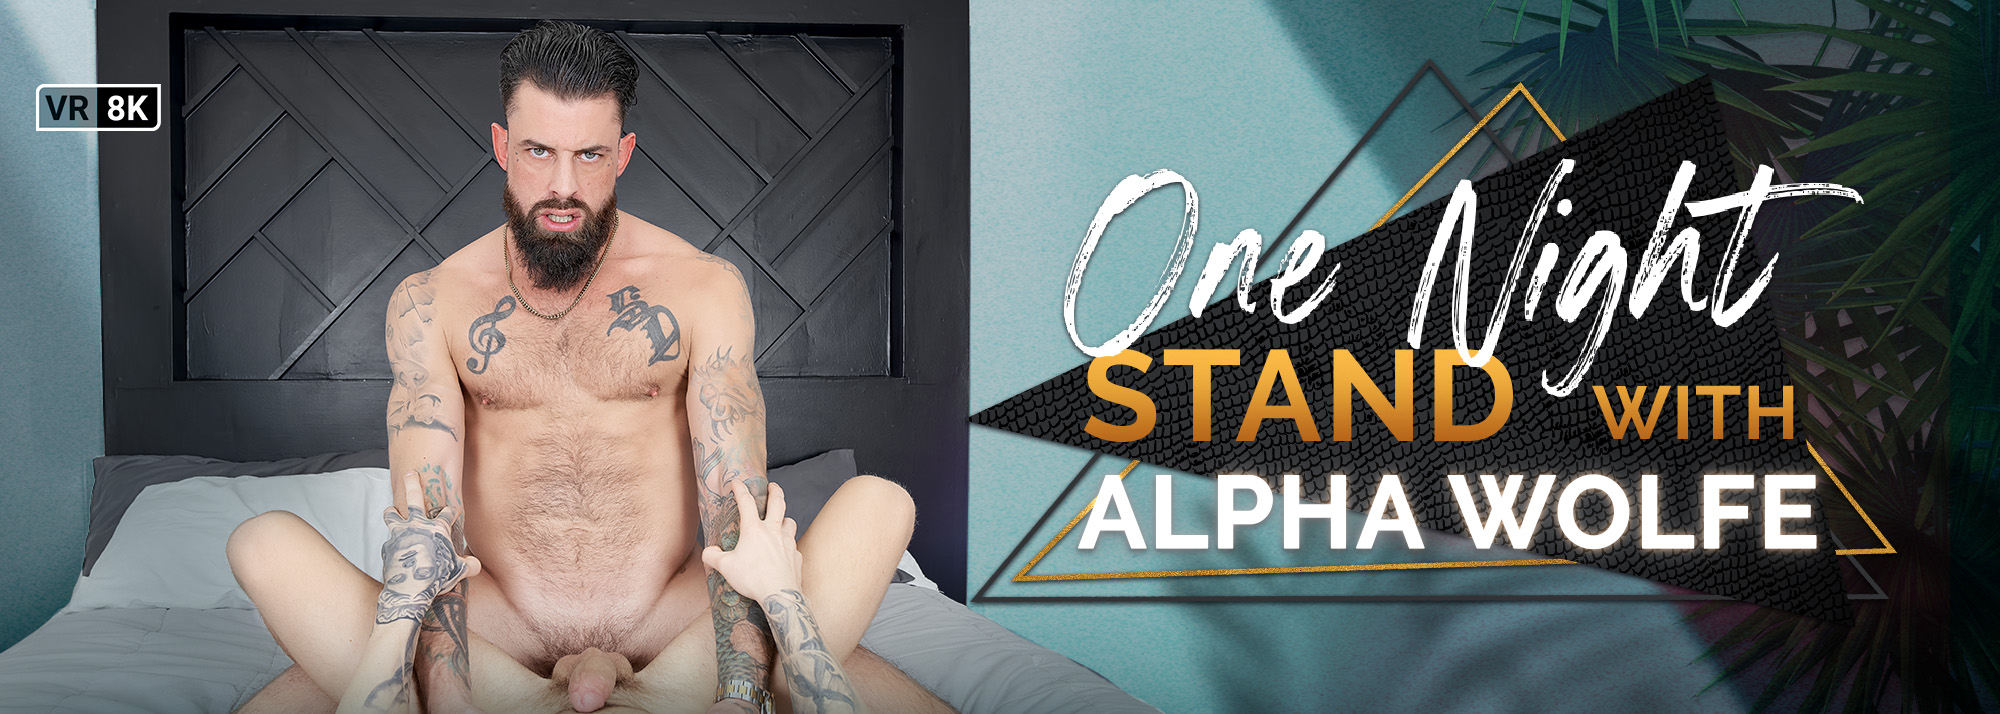 One Night Stand With Alpha Wolfe - VR Porn Video, Starring: Alpha Wolfe VR